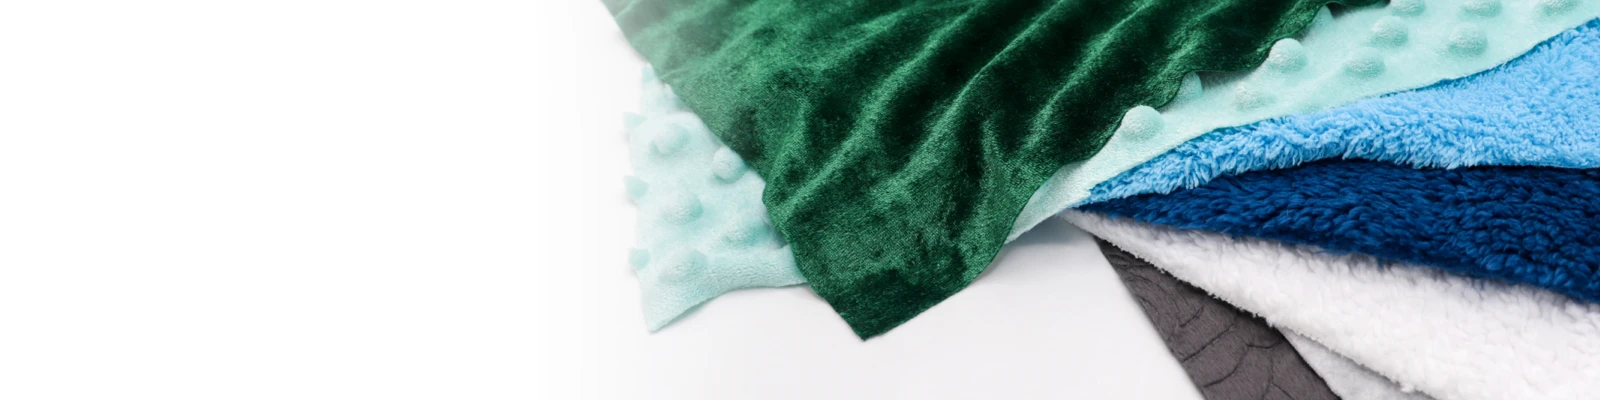 The ultimate warmth and comfort with our luxurious Fleece &amp; Pile Fabric. Perfect for blankets, winter clothing, and home decor, this high-quality fabric.